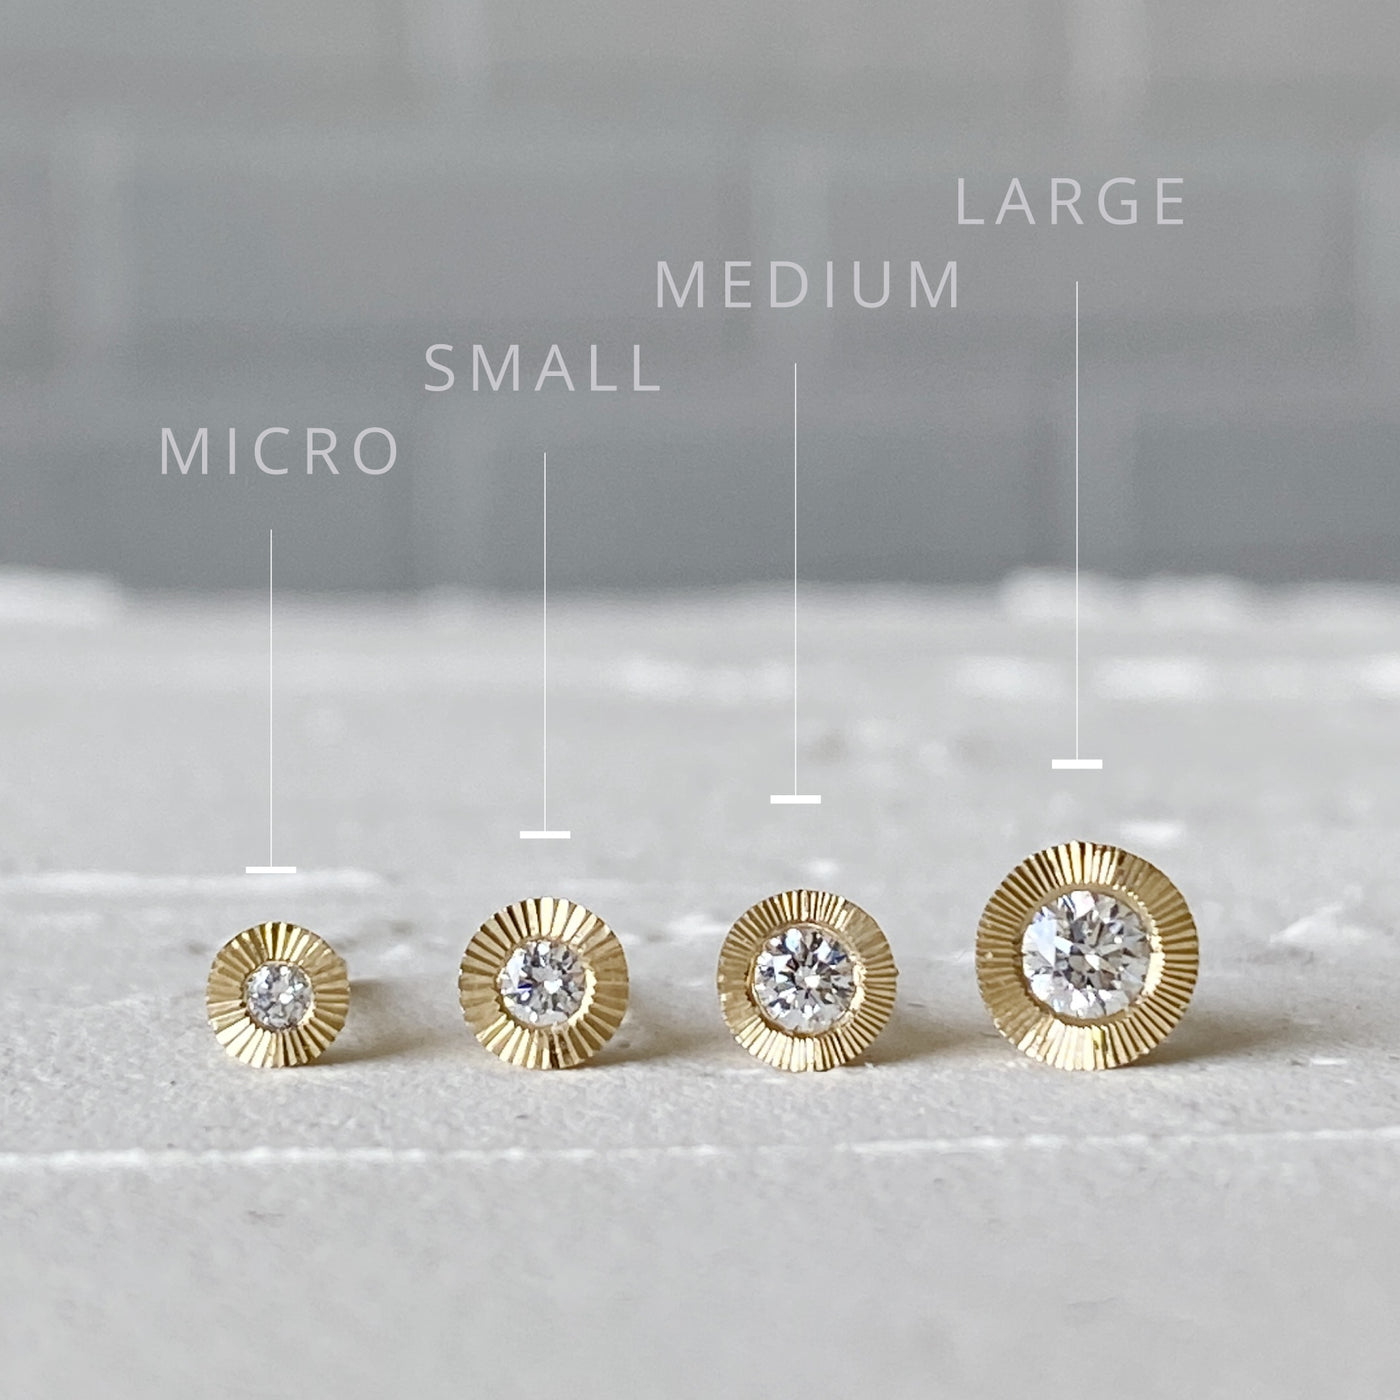 4 Sizes of 14k yellow gold Aurora Stud Earrings from Left to Right: Micro (1.5mm diamond) Small (2mm diamond) Medium (2.5mm diamond) and Large (3mm diamond)